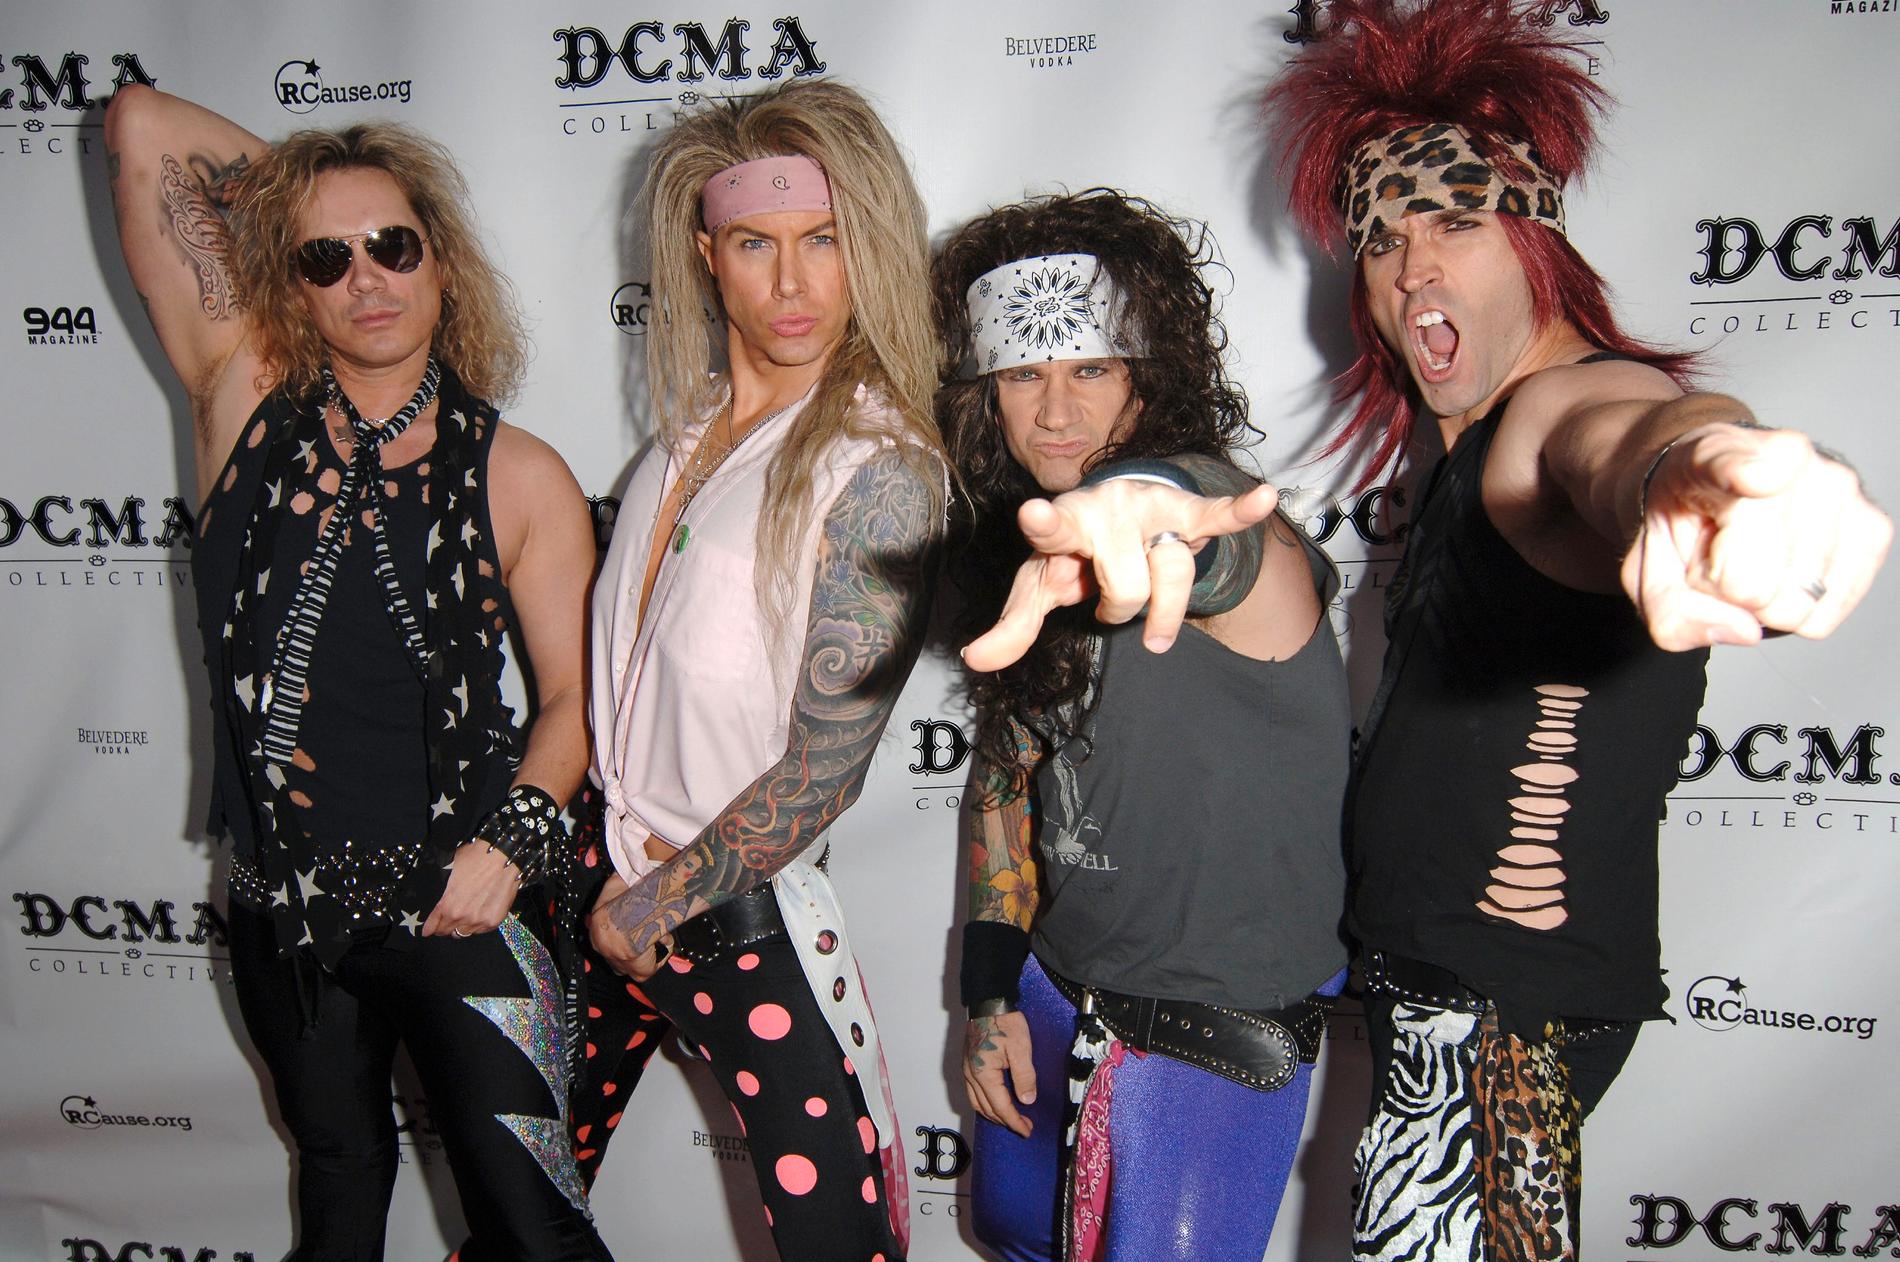 Steel Panther.